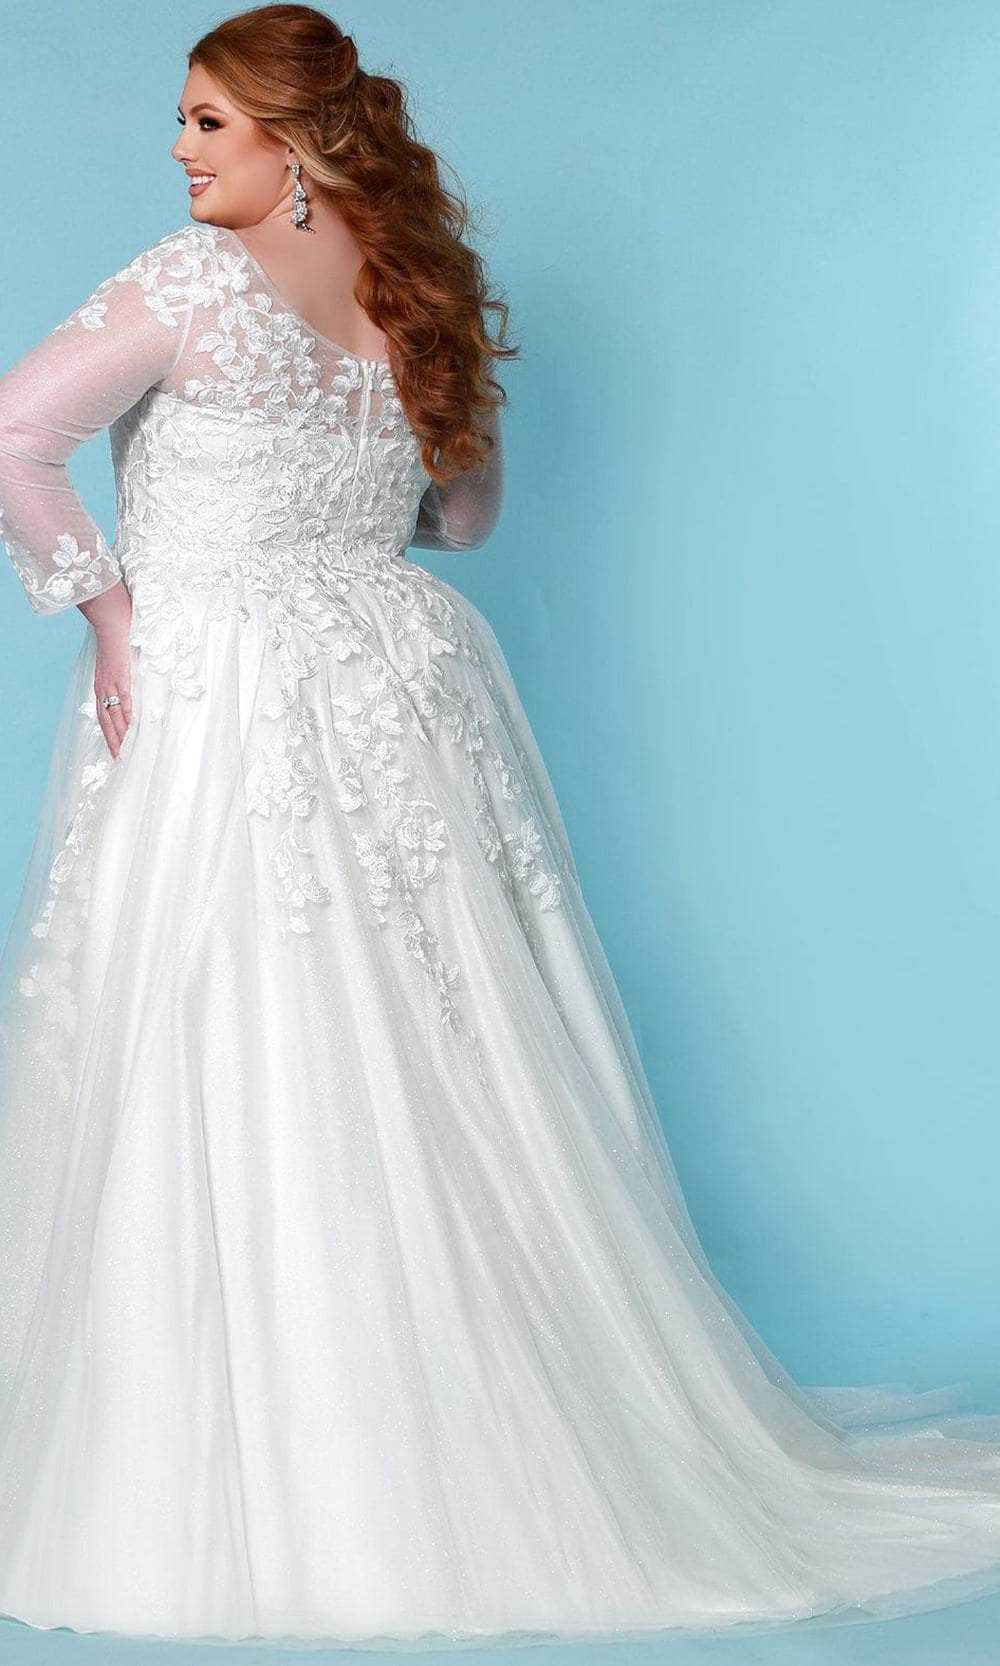 Sydney's Closet Bridal, Sydney's Closet Bridal - SC5267 Embroidered Glitter Bridal Gown